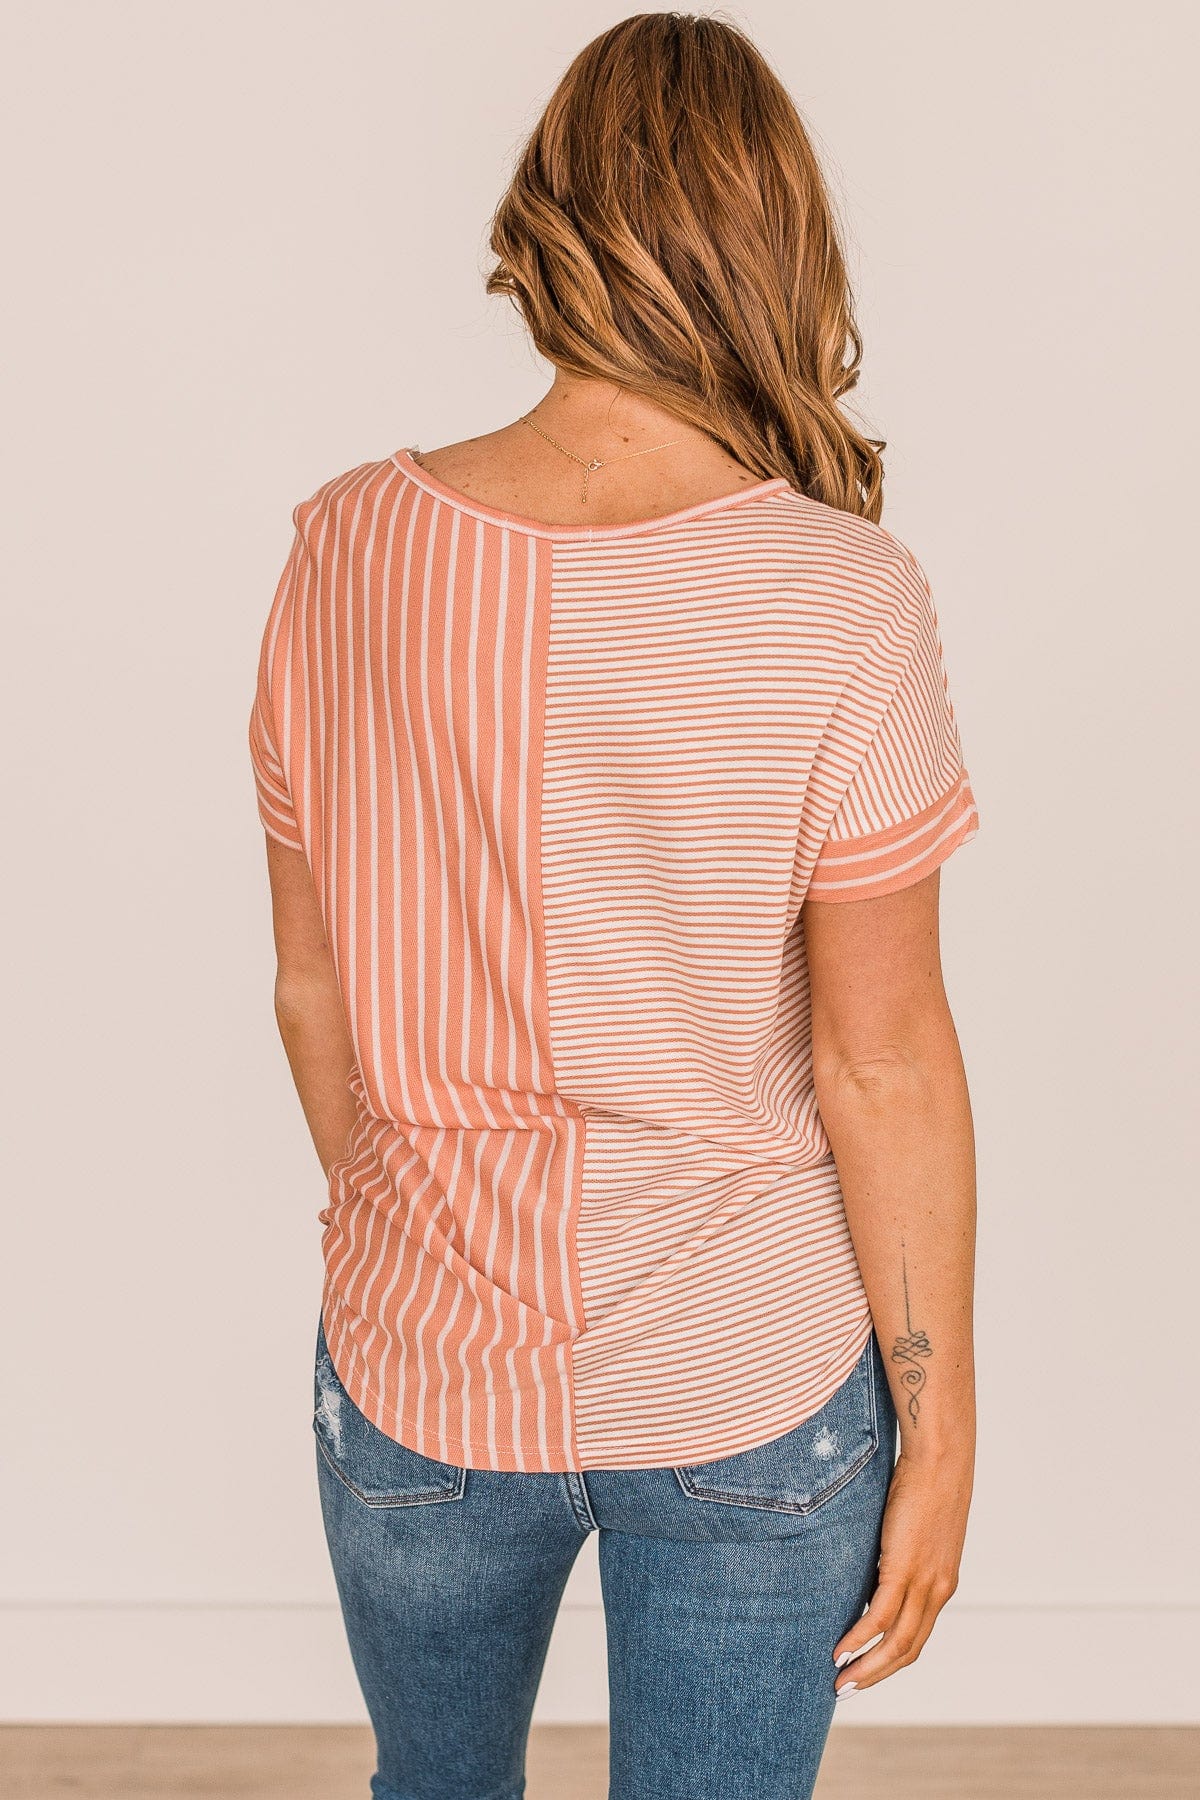 In High Spirits Striped Top- Coral